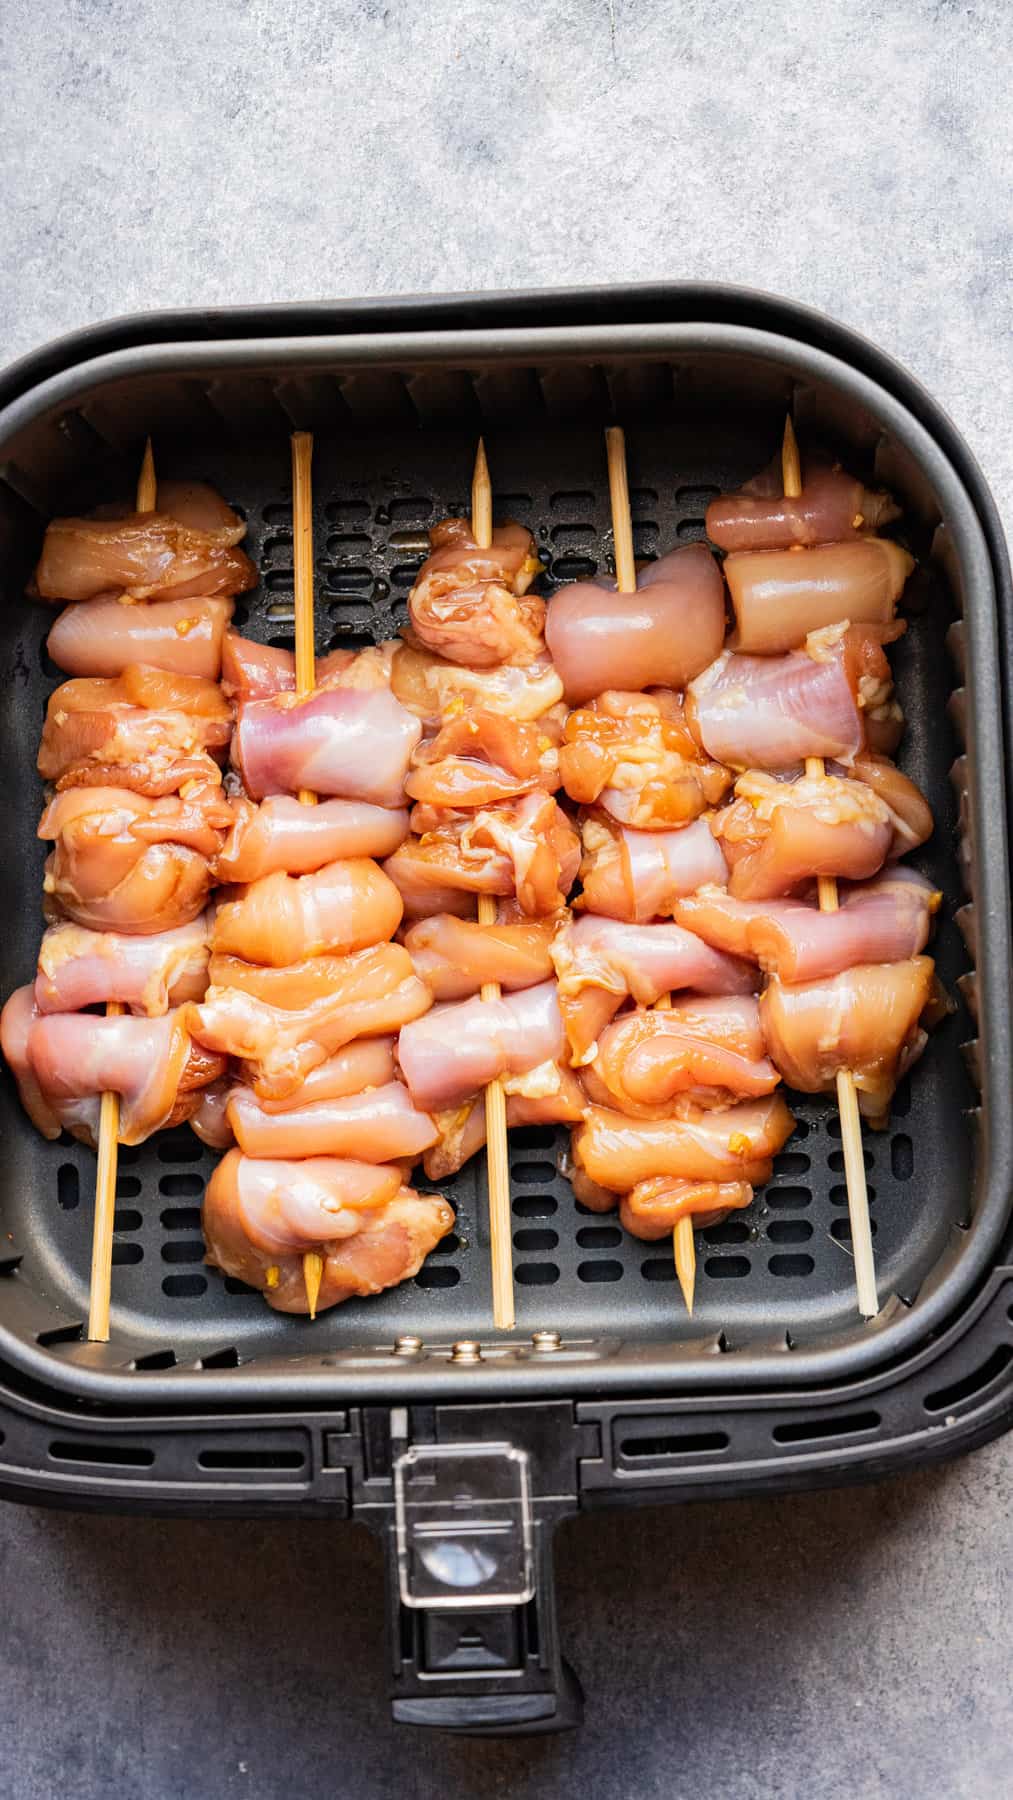 Uncooked marinated chicken skewers in the air fryer basket.